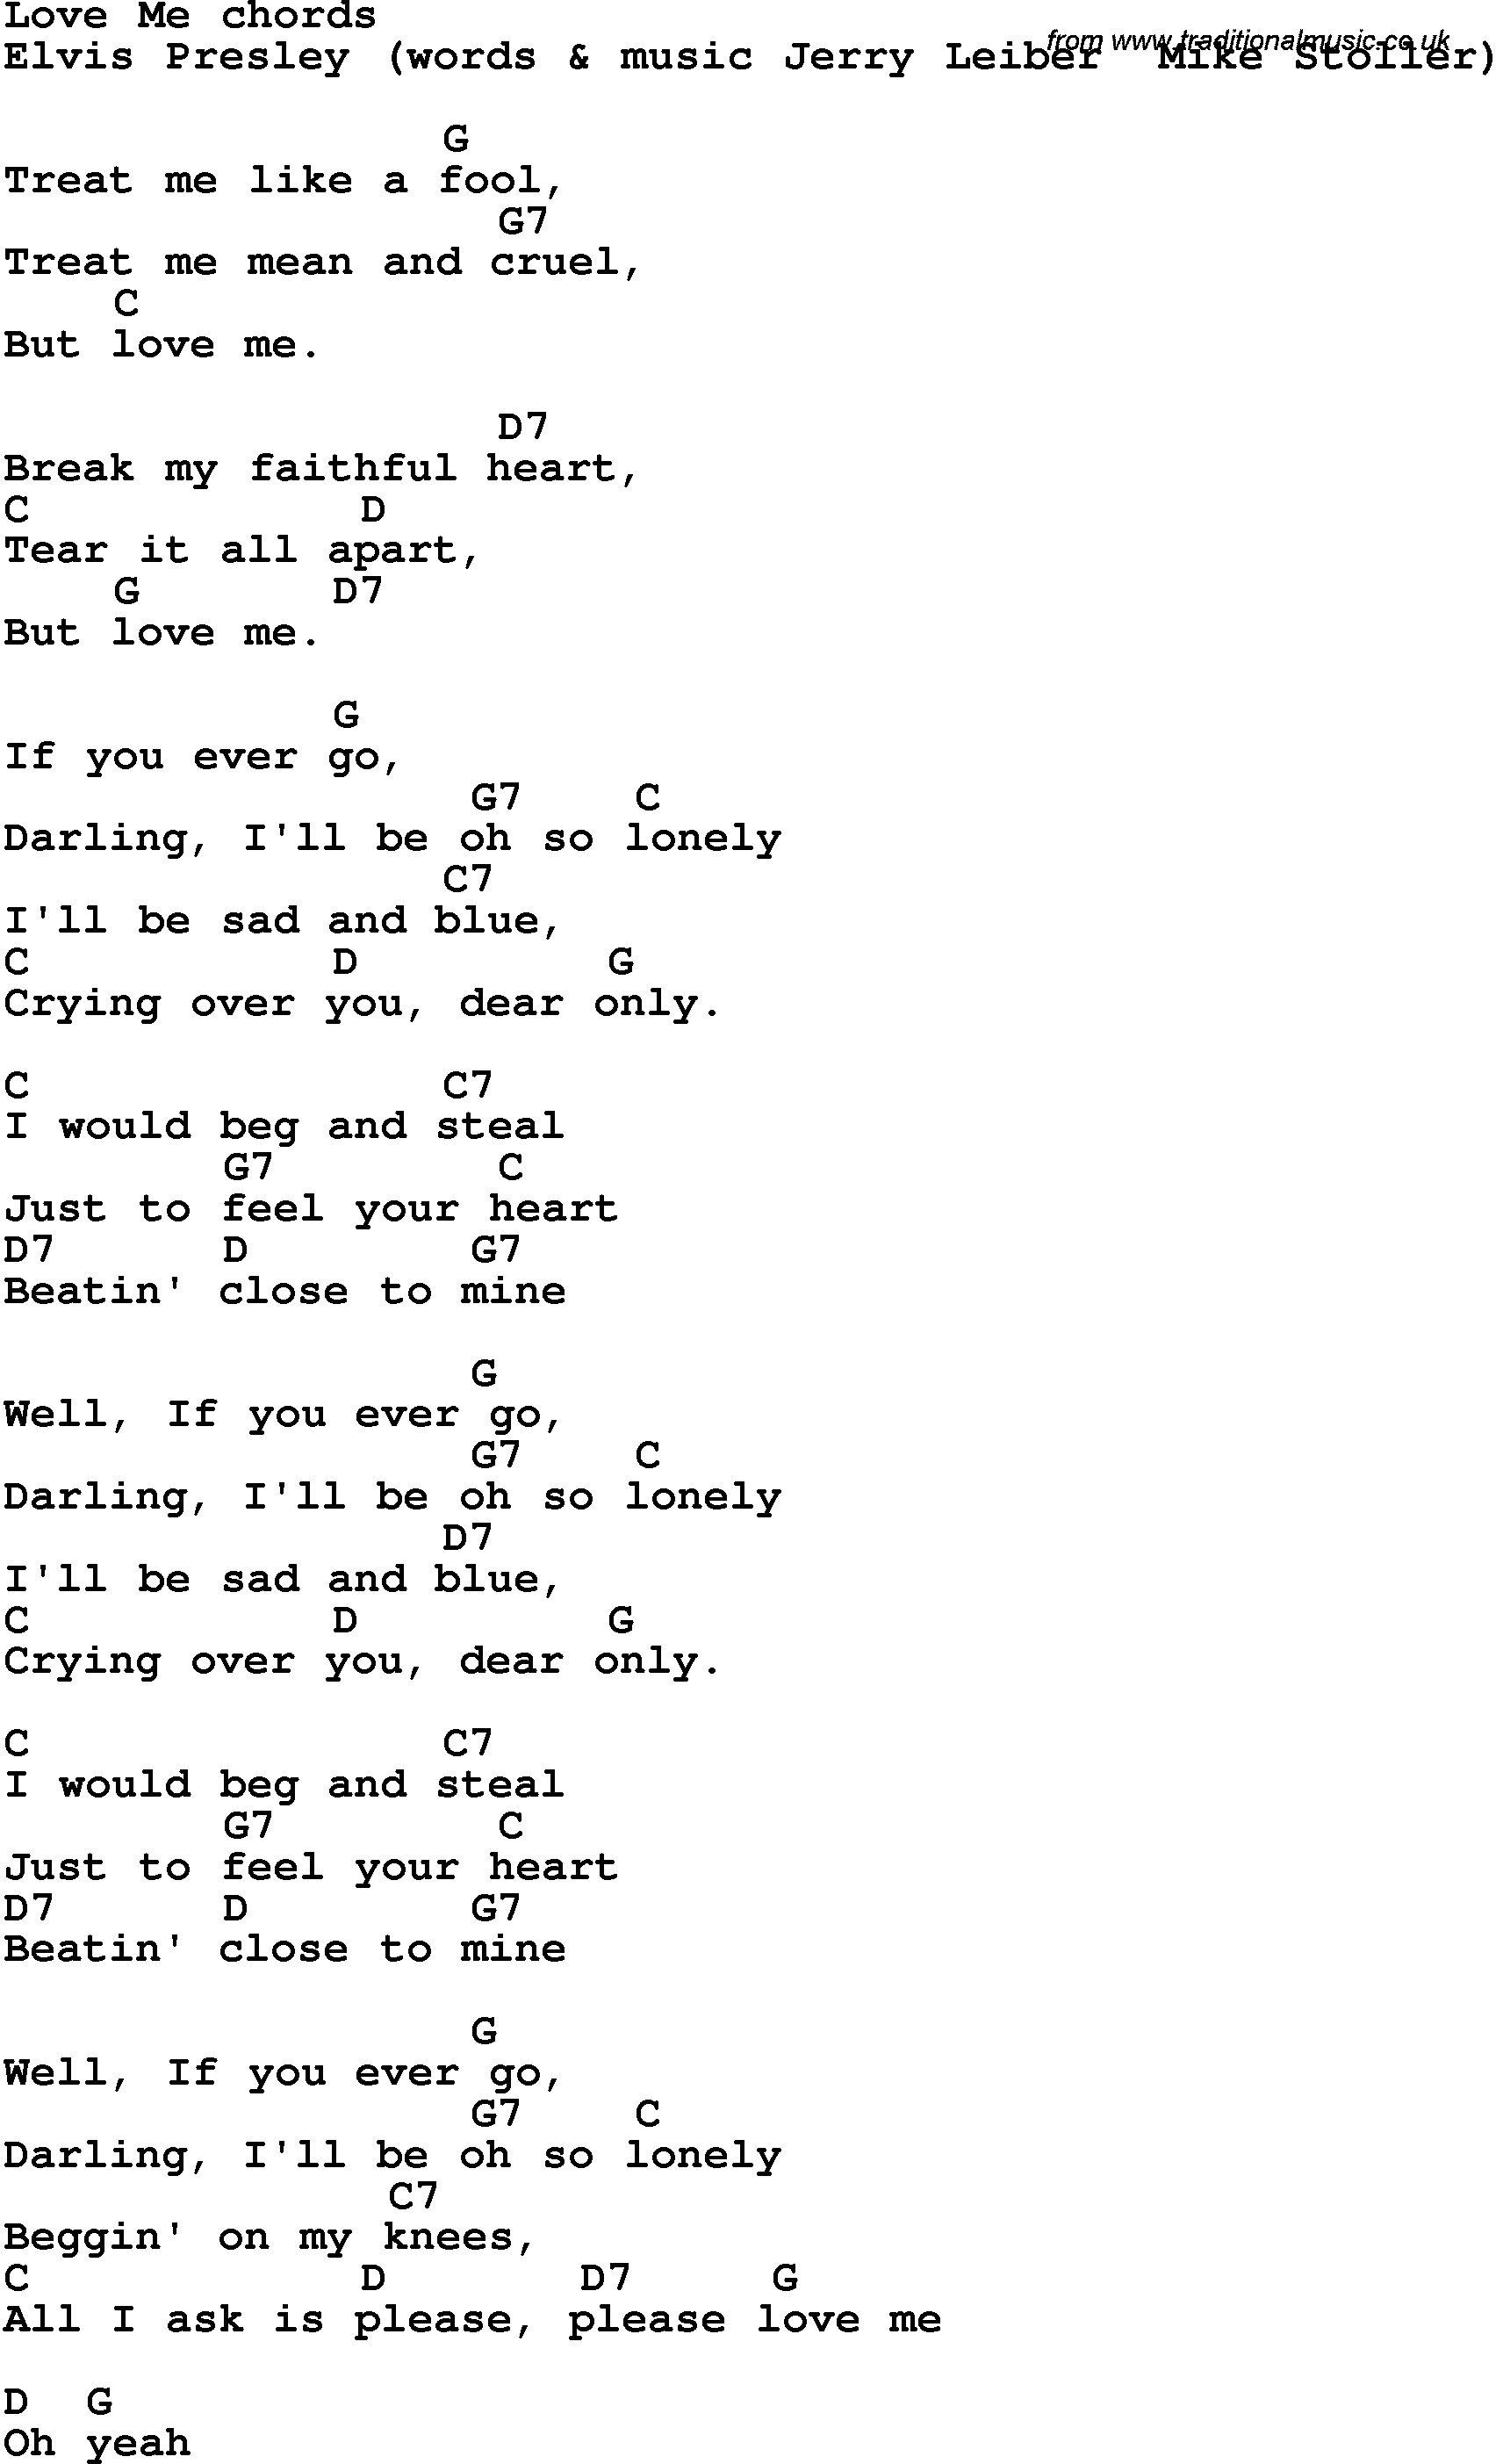 Song Lyrics with guitar chords for Love Me